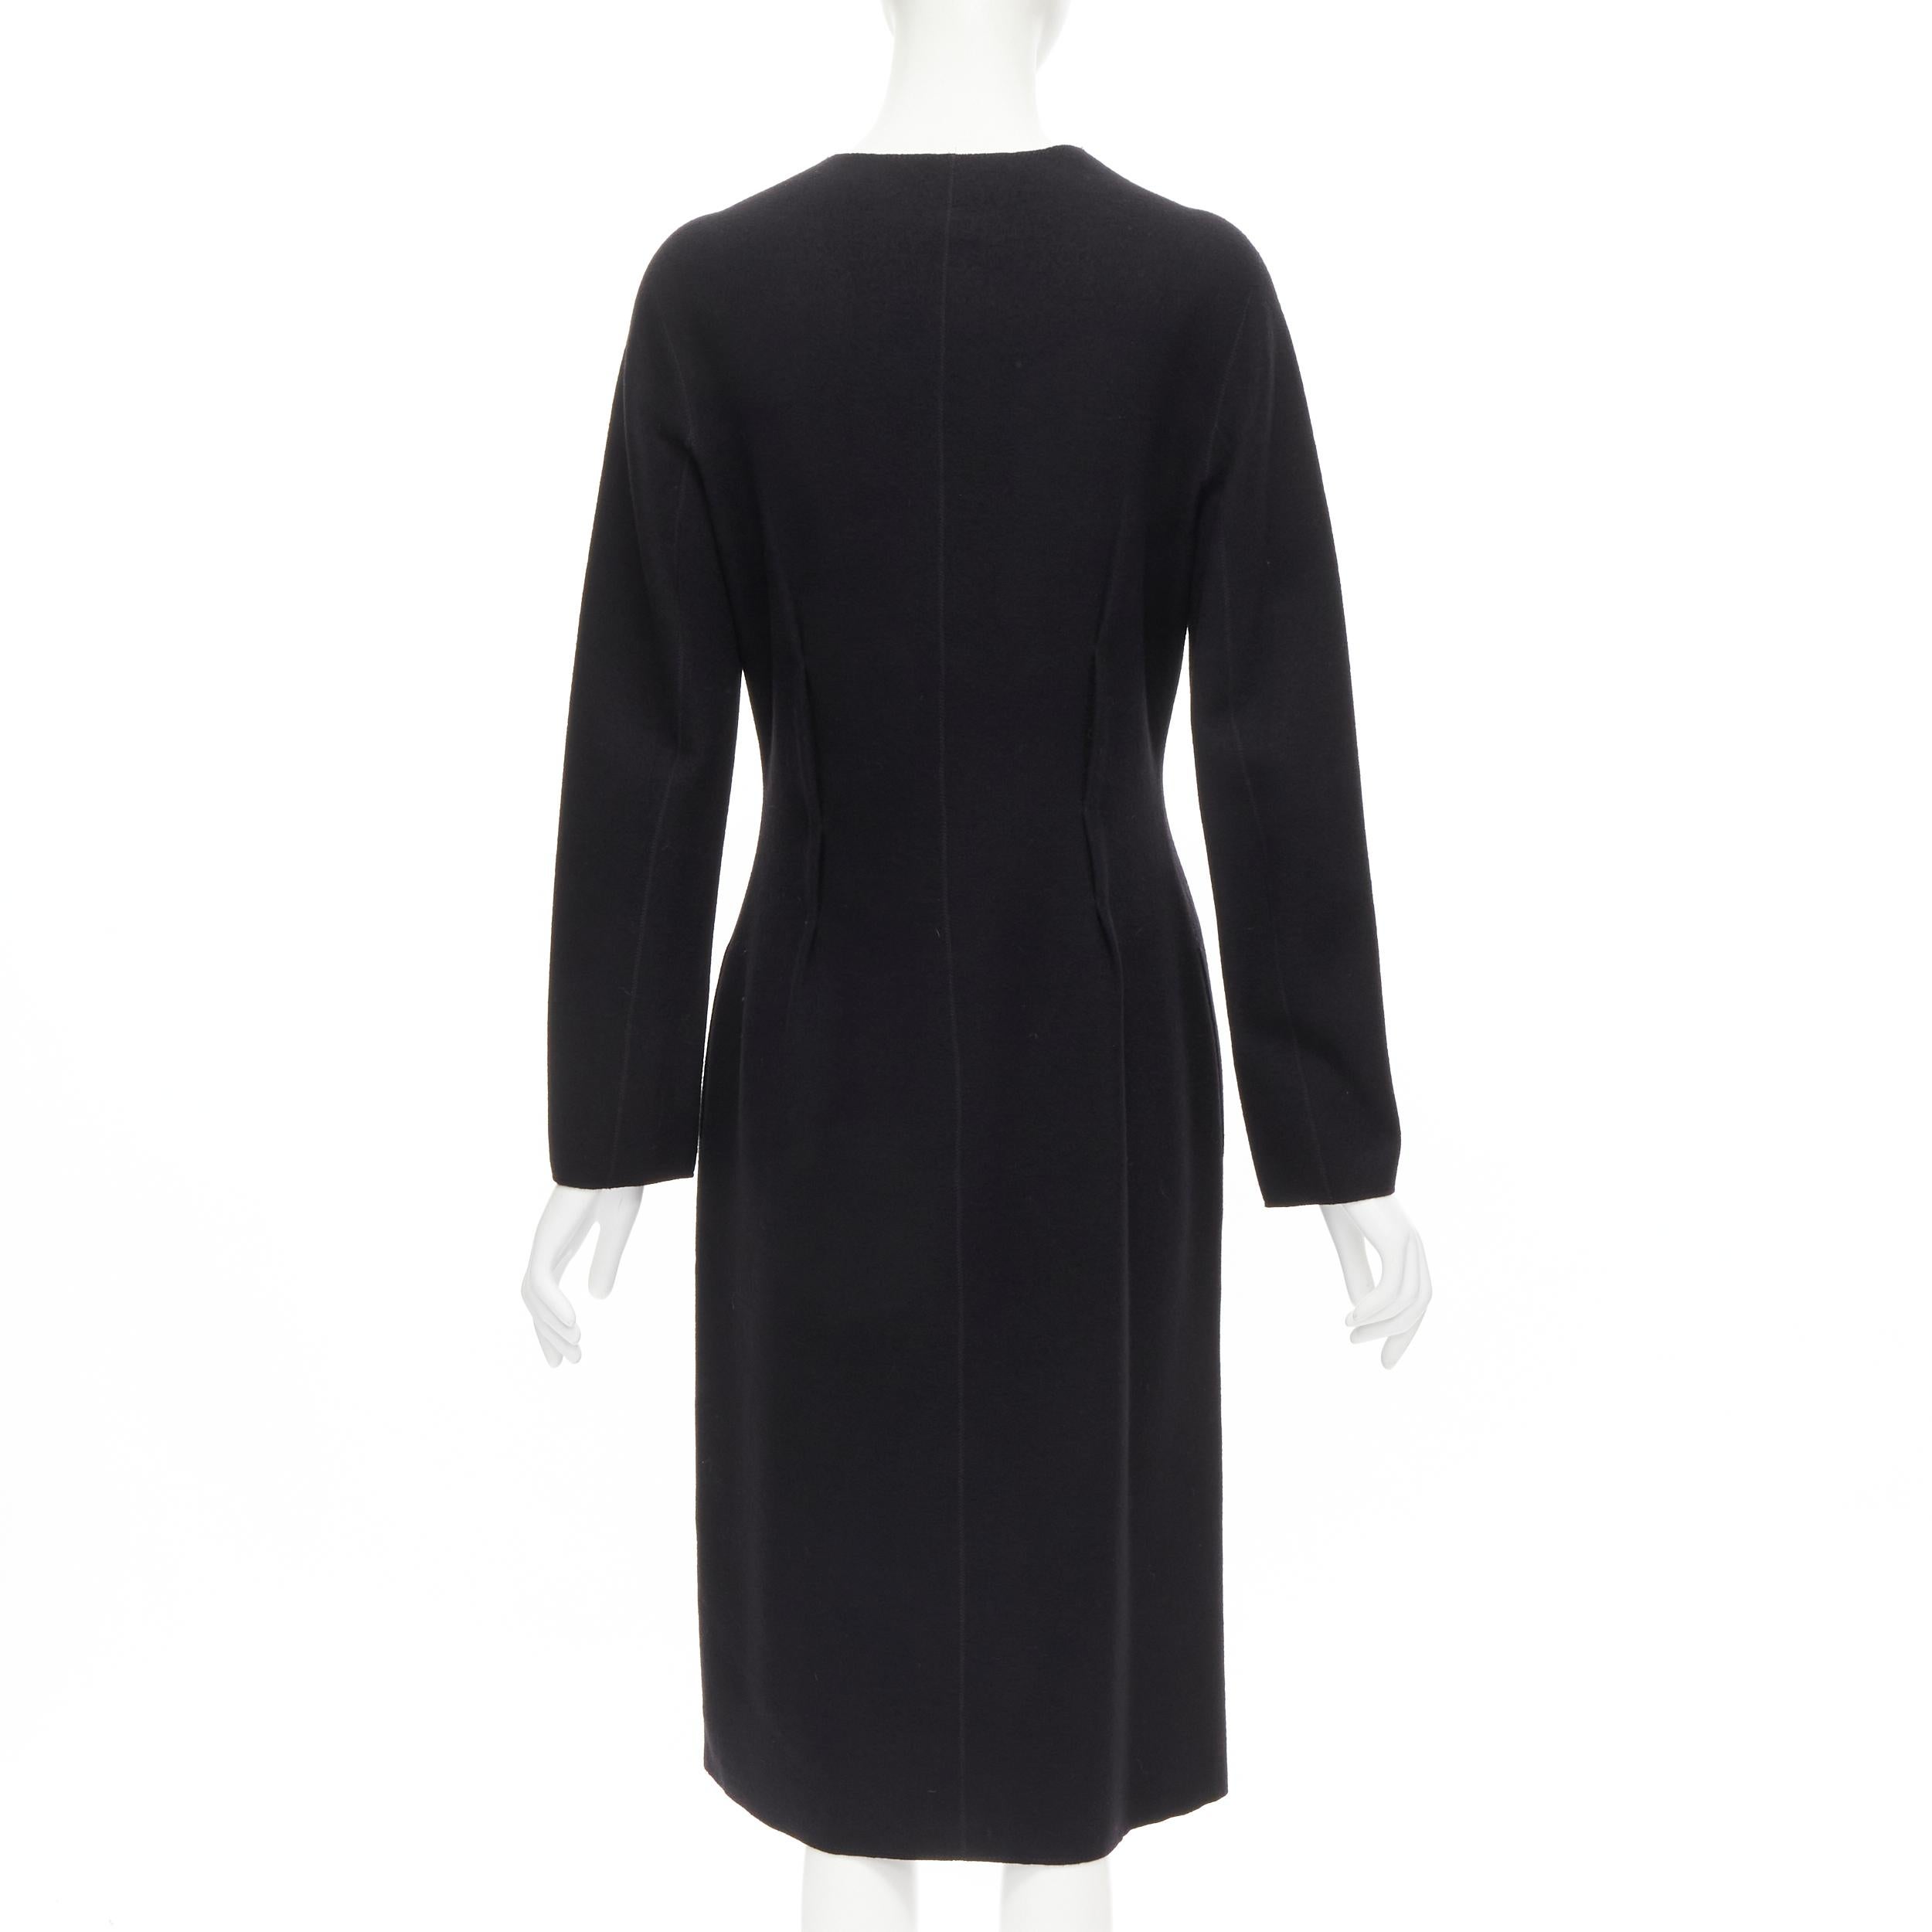 LANVIN Alber Elbaz 2004 black wool pinched darts button front fitted coat FR38 S For Sale 1